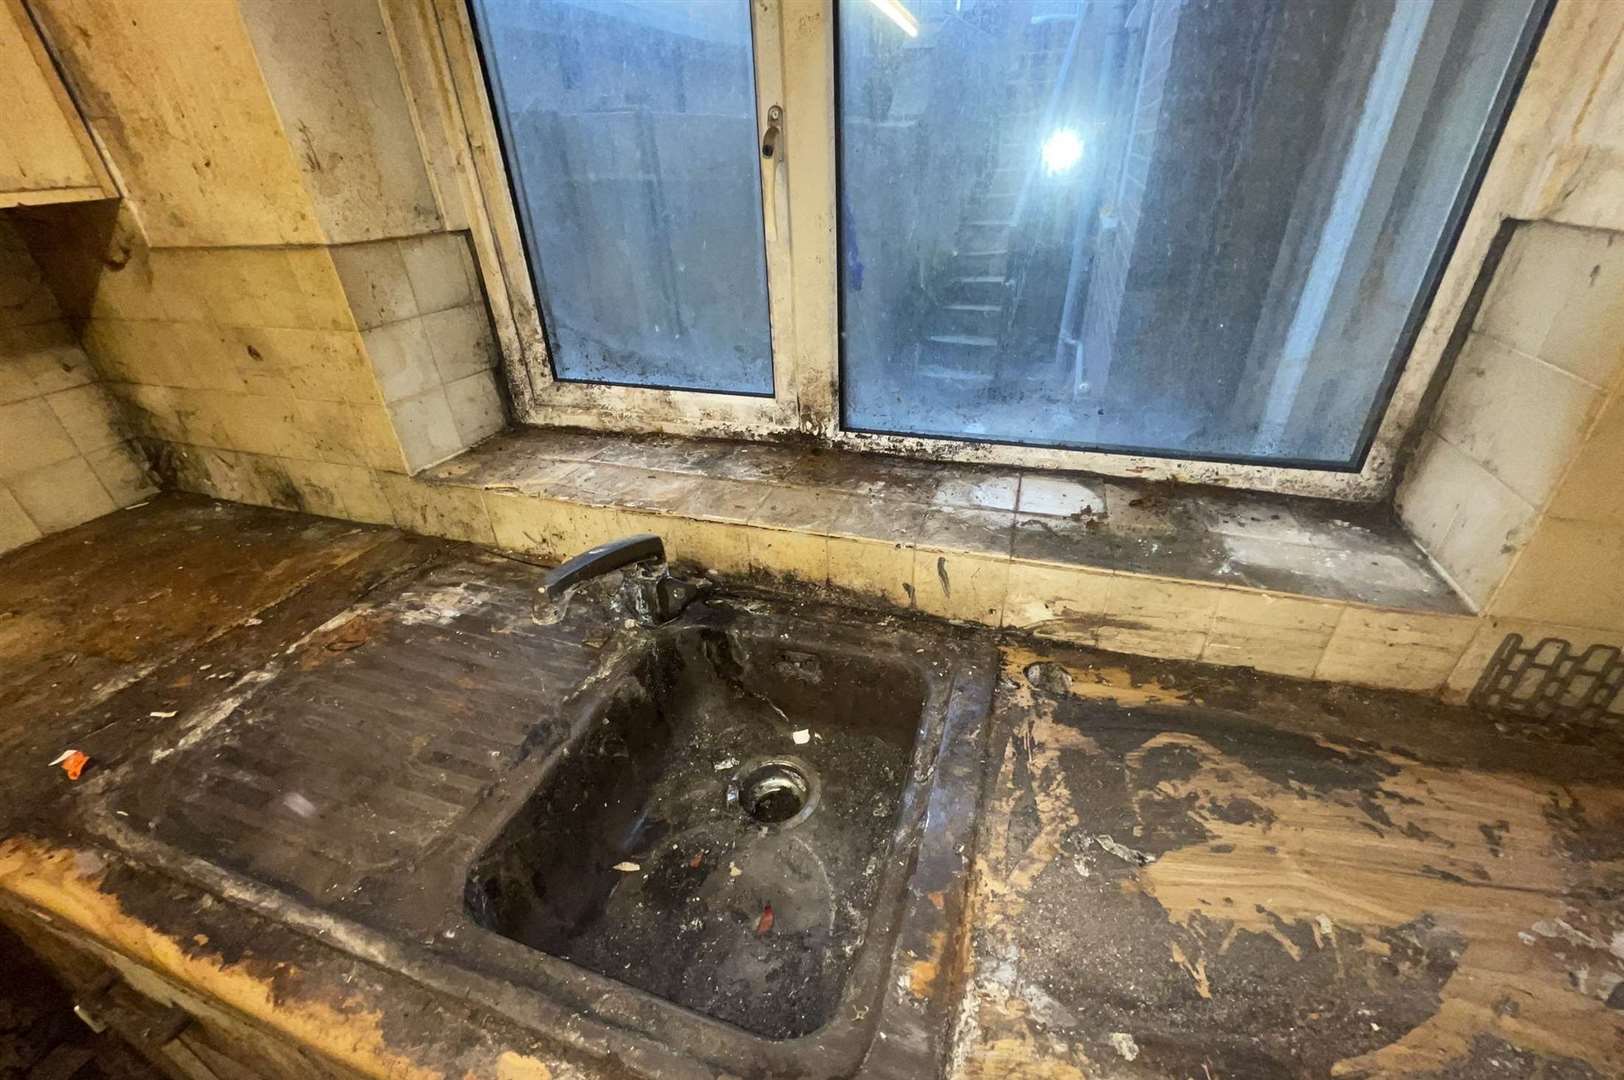 Filthy kitchen inside a property that hadn’t been cleaned properly in twenty years. Photo: SWNS